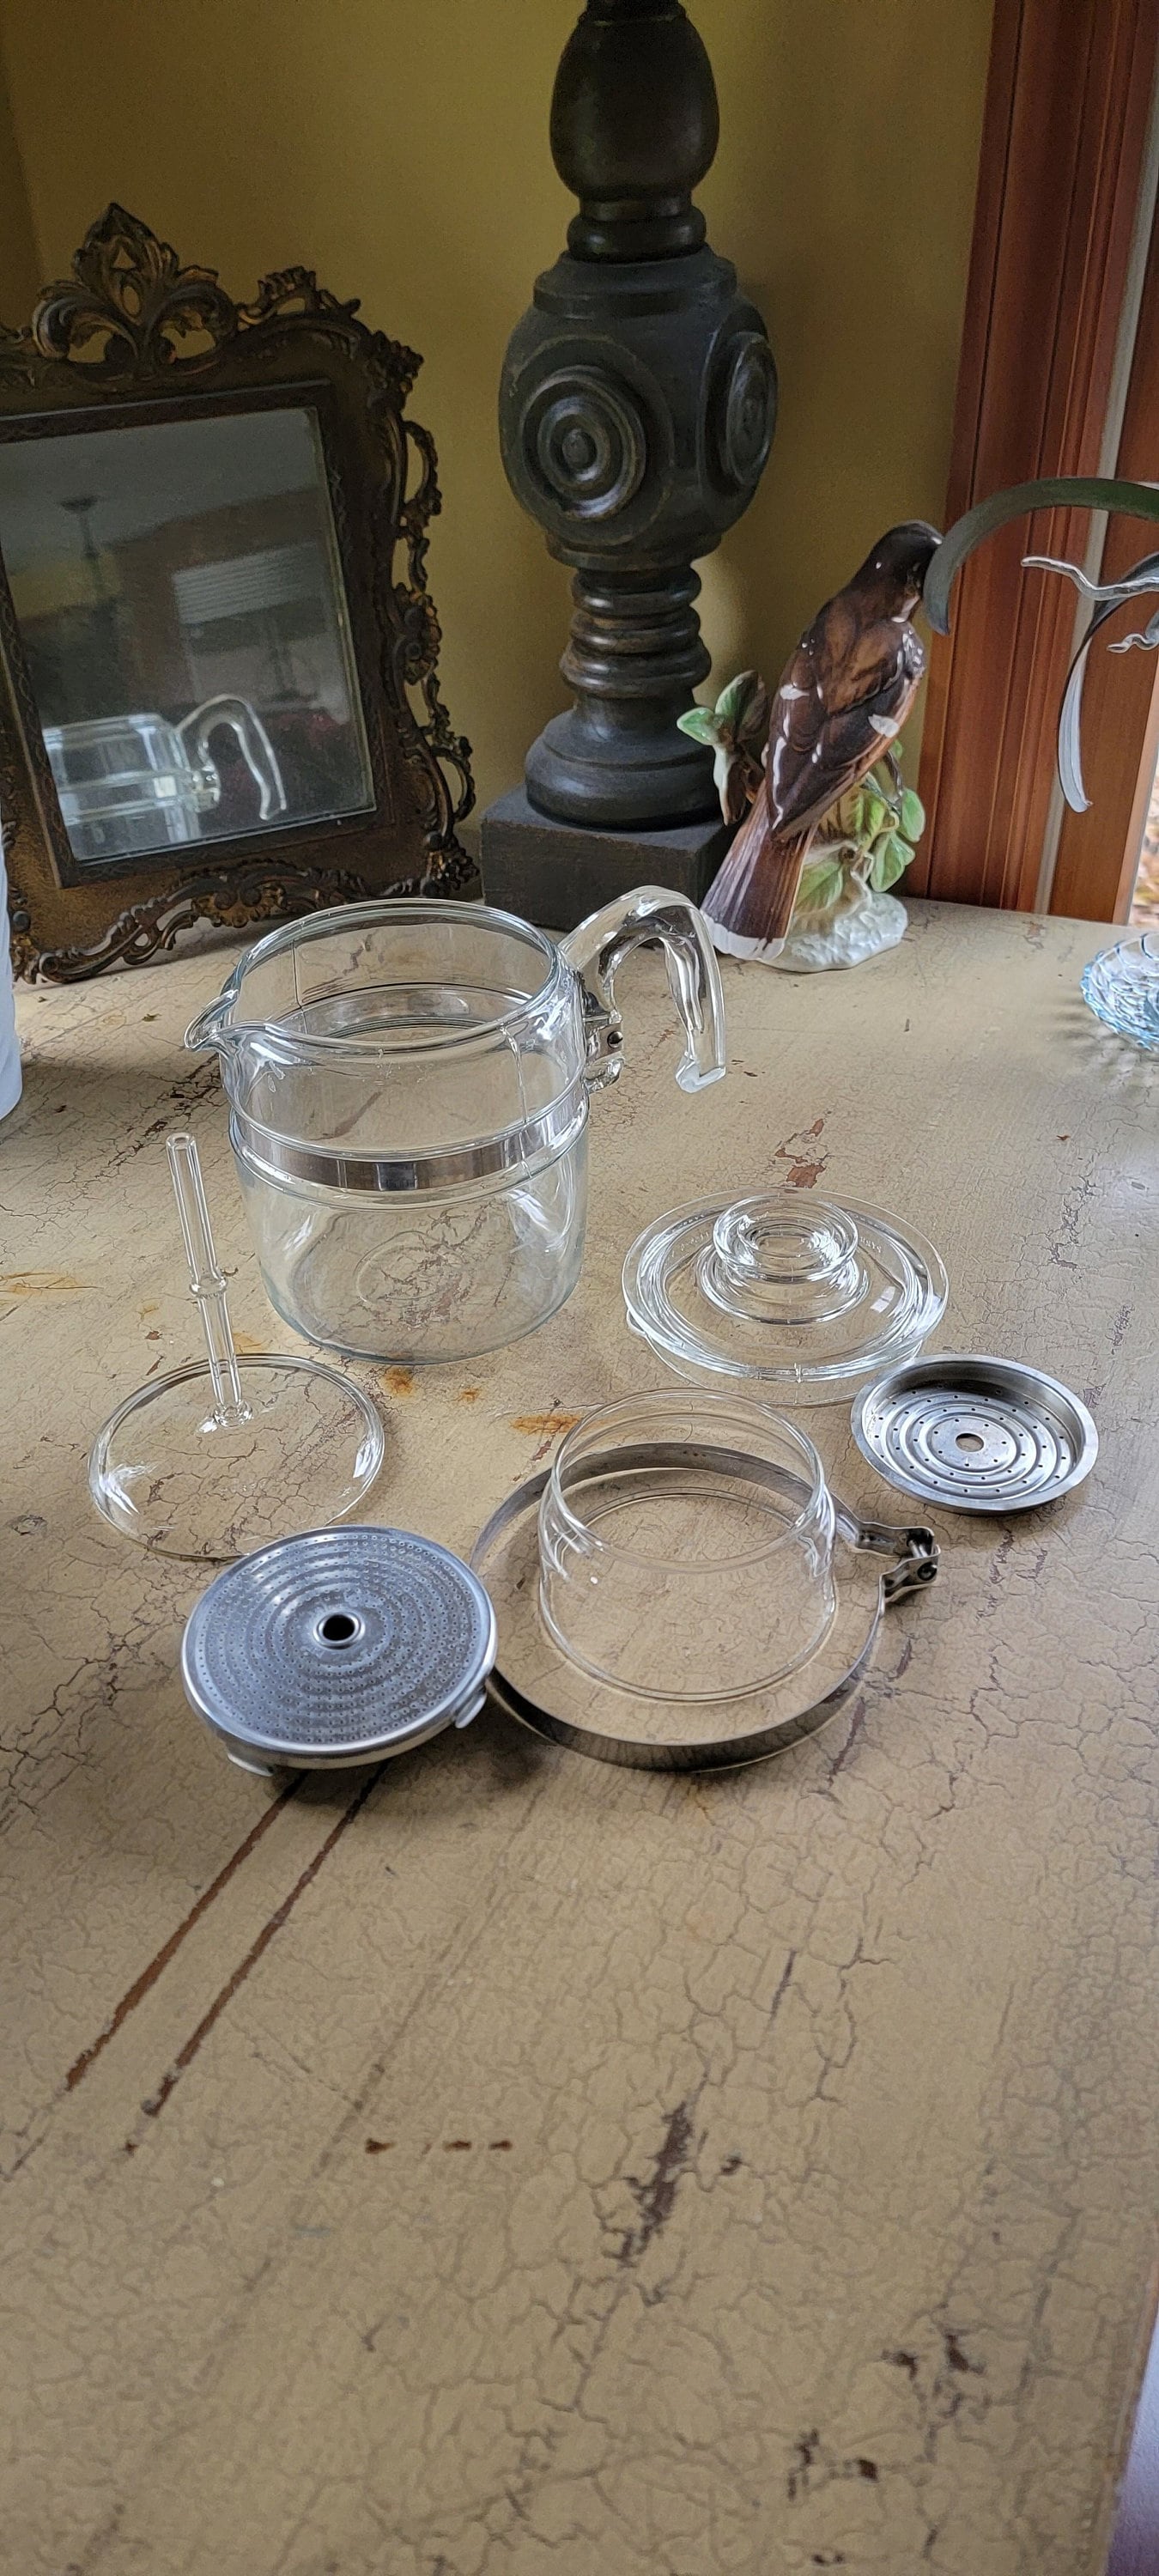 Pyrex Flameware 4 Cup Glass Milk Warmer Insert RARE [7754 4 cup milk  warmer] - $59.95 : Classic Kitchens And More, Authentic Retro Kitchenware